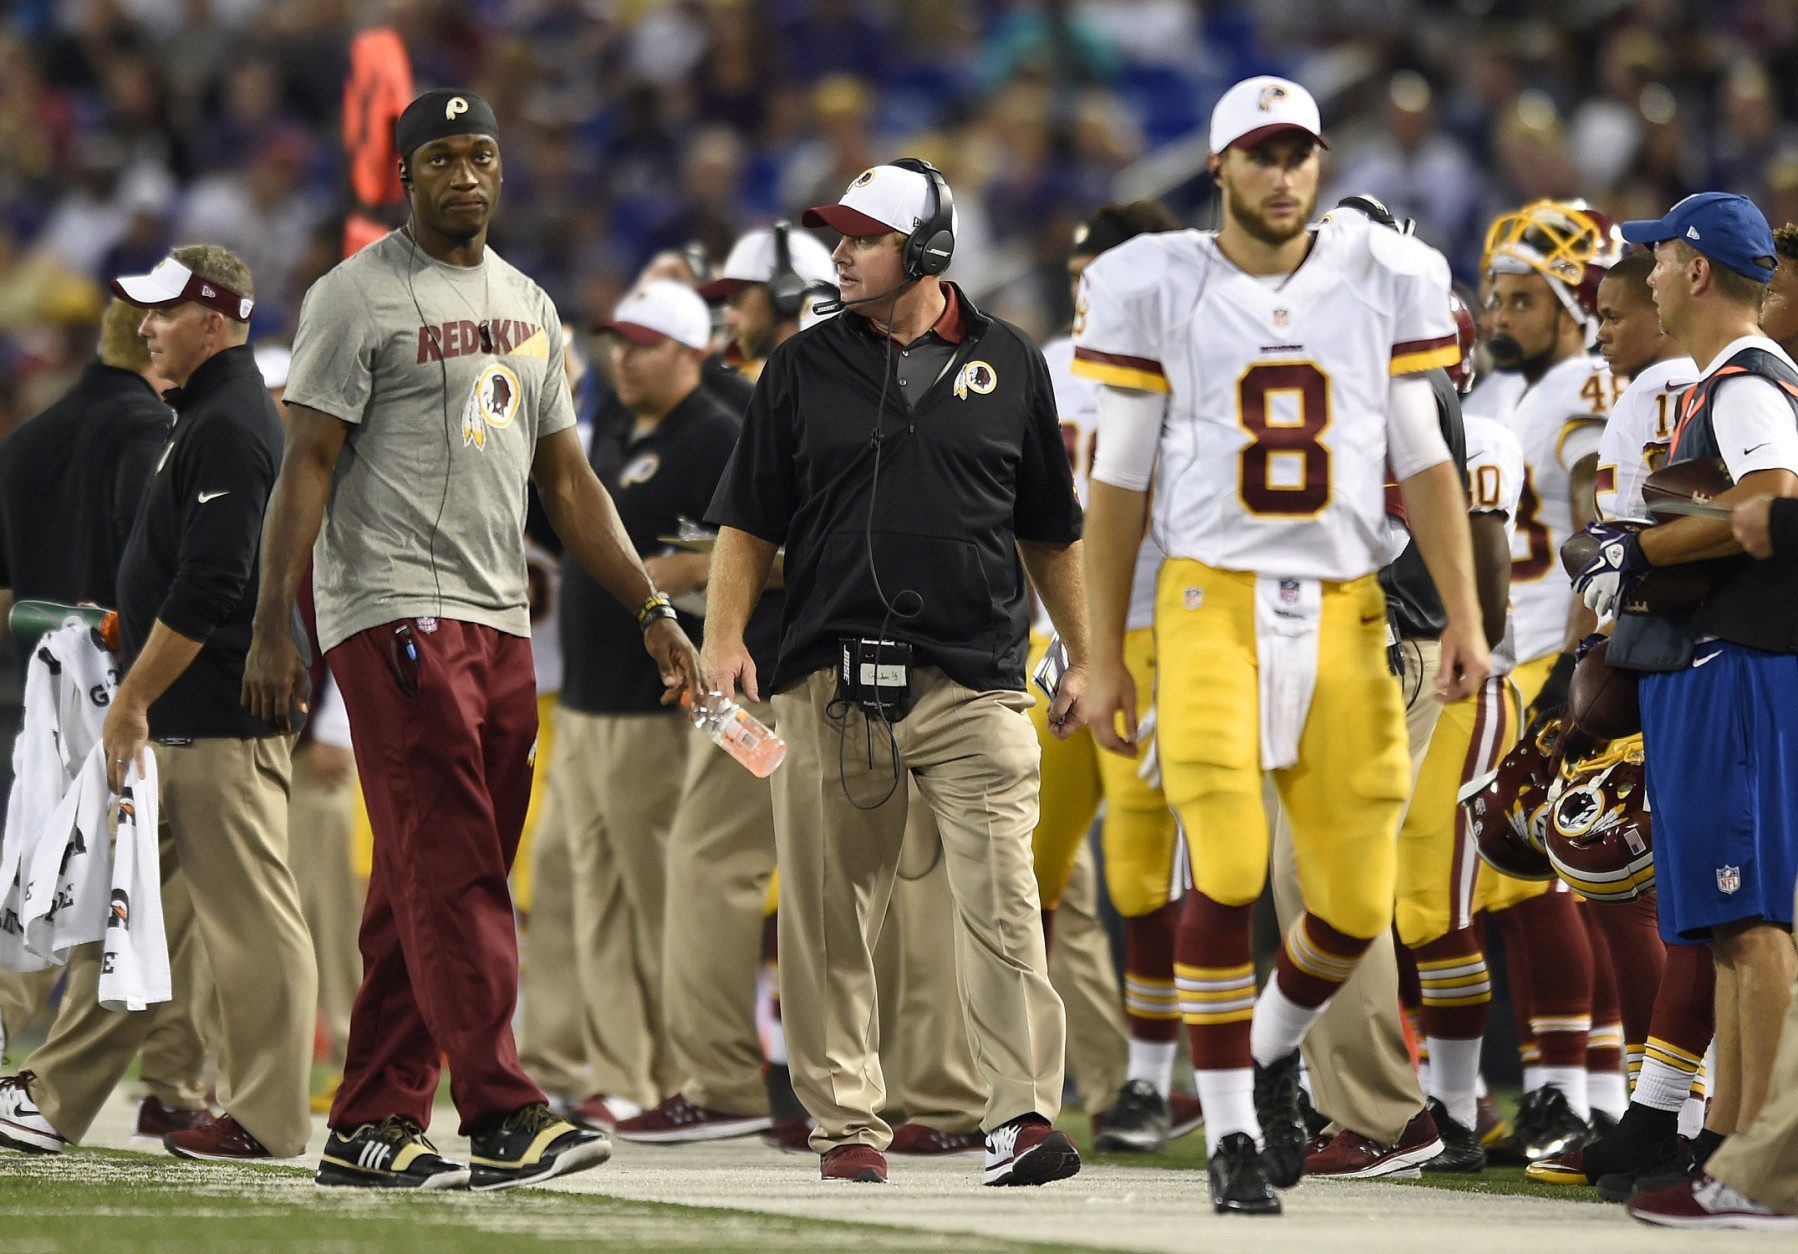 Washington Redskins head coach Jay Gruden, center, walks on the sideline behind quarterbacks Robert Griffin III, left, and Kirk Cousins (8) in the second half of a preseason NFL football game against the Baltimore Ravens, Saturday, Aug. 29, 2015, in Baltimore. (AP Photo/Gail Burton)